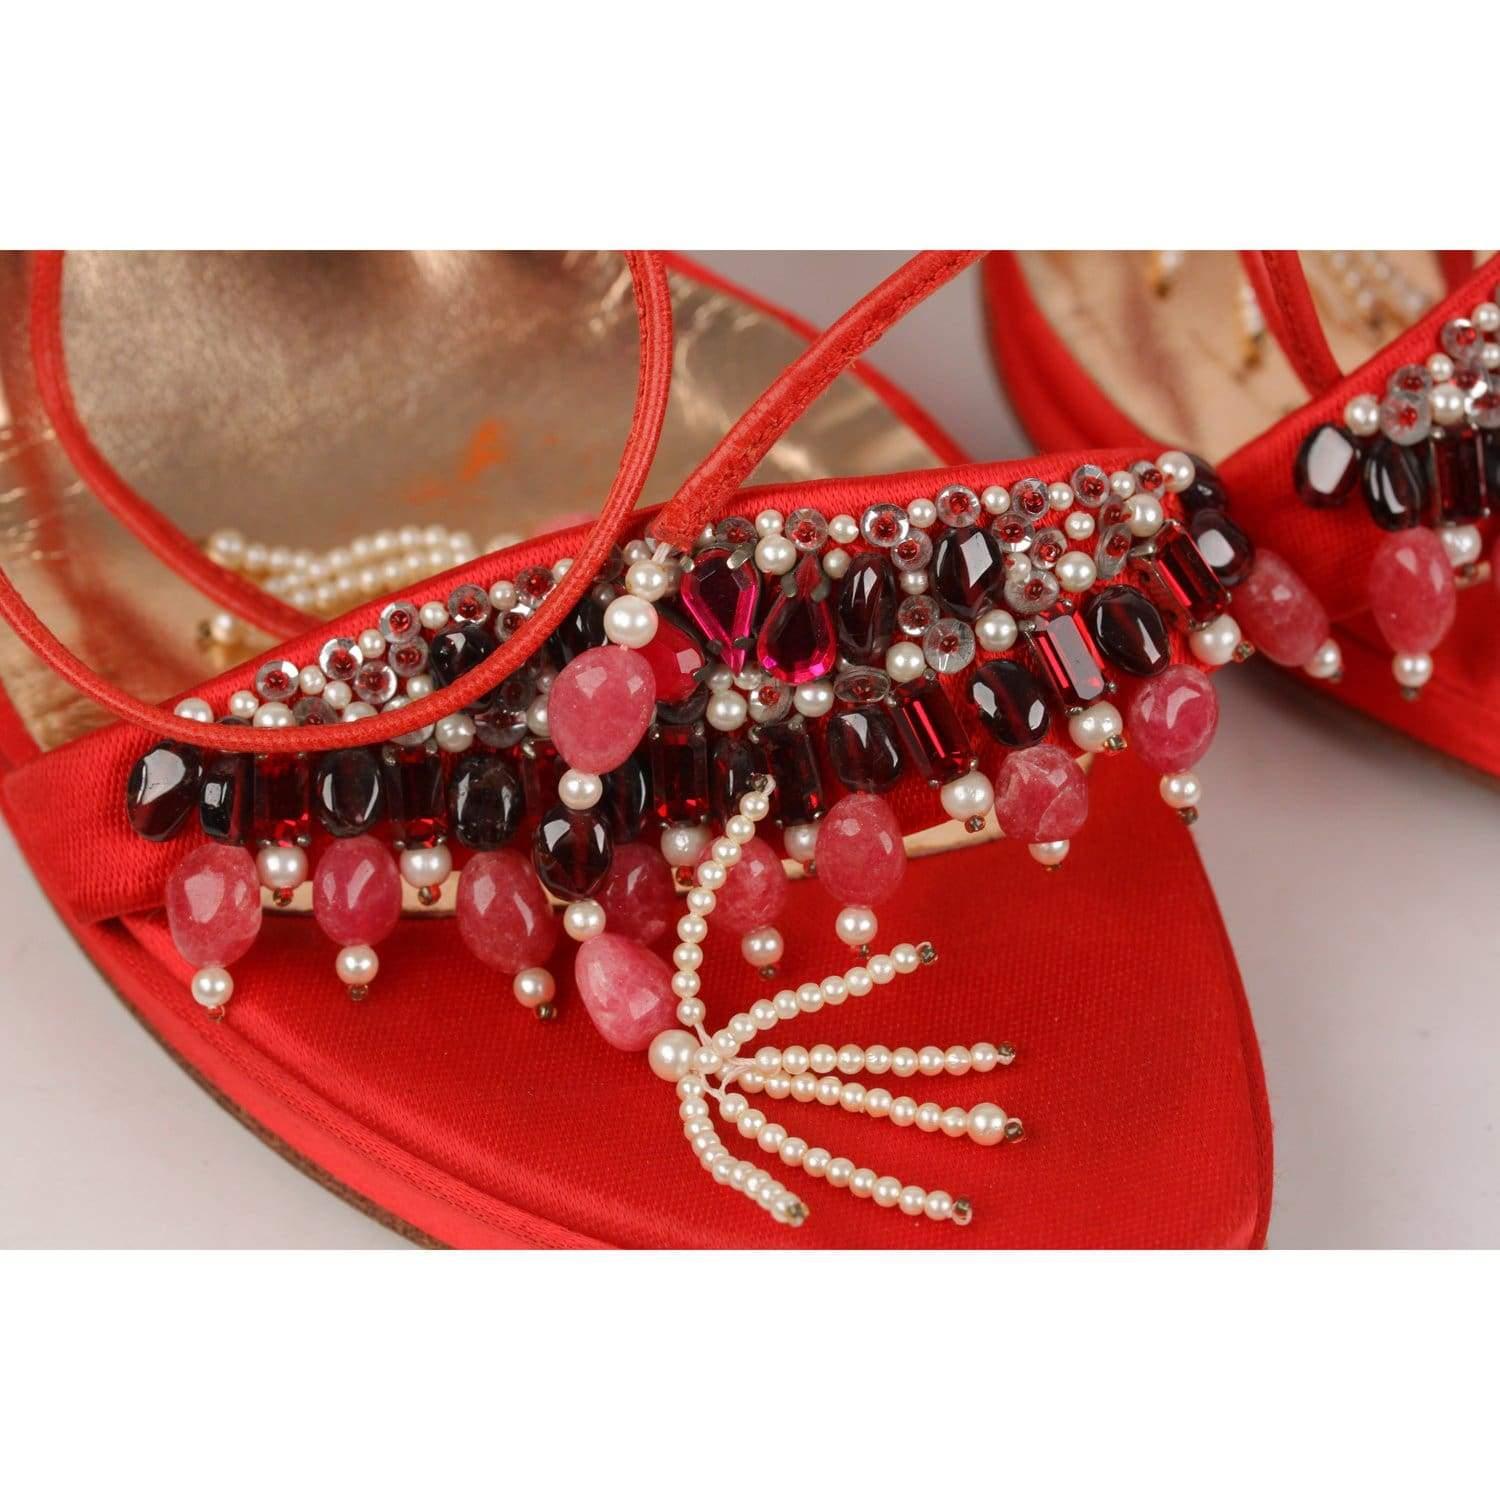 Sergio Rossi Embellished Satin Heeled Sandals Size 37.5 In Excellent Condition In Rome, Rome